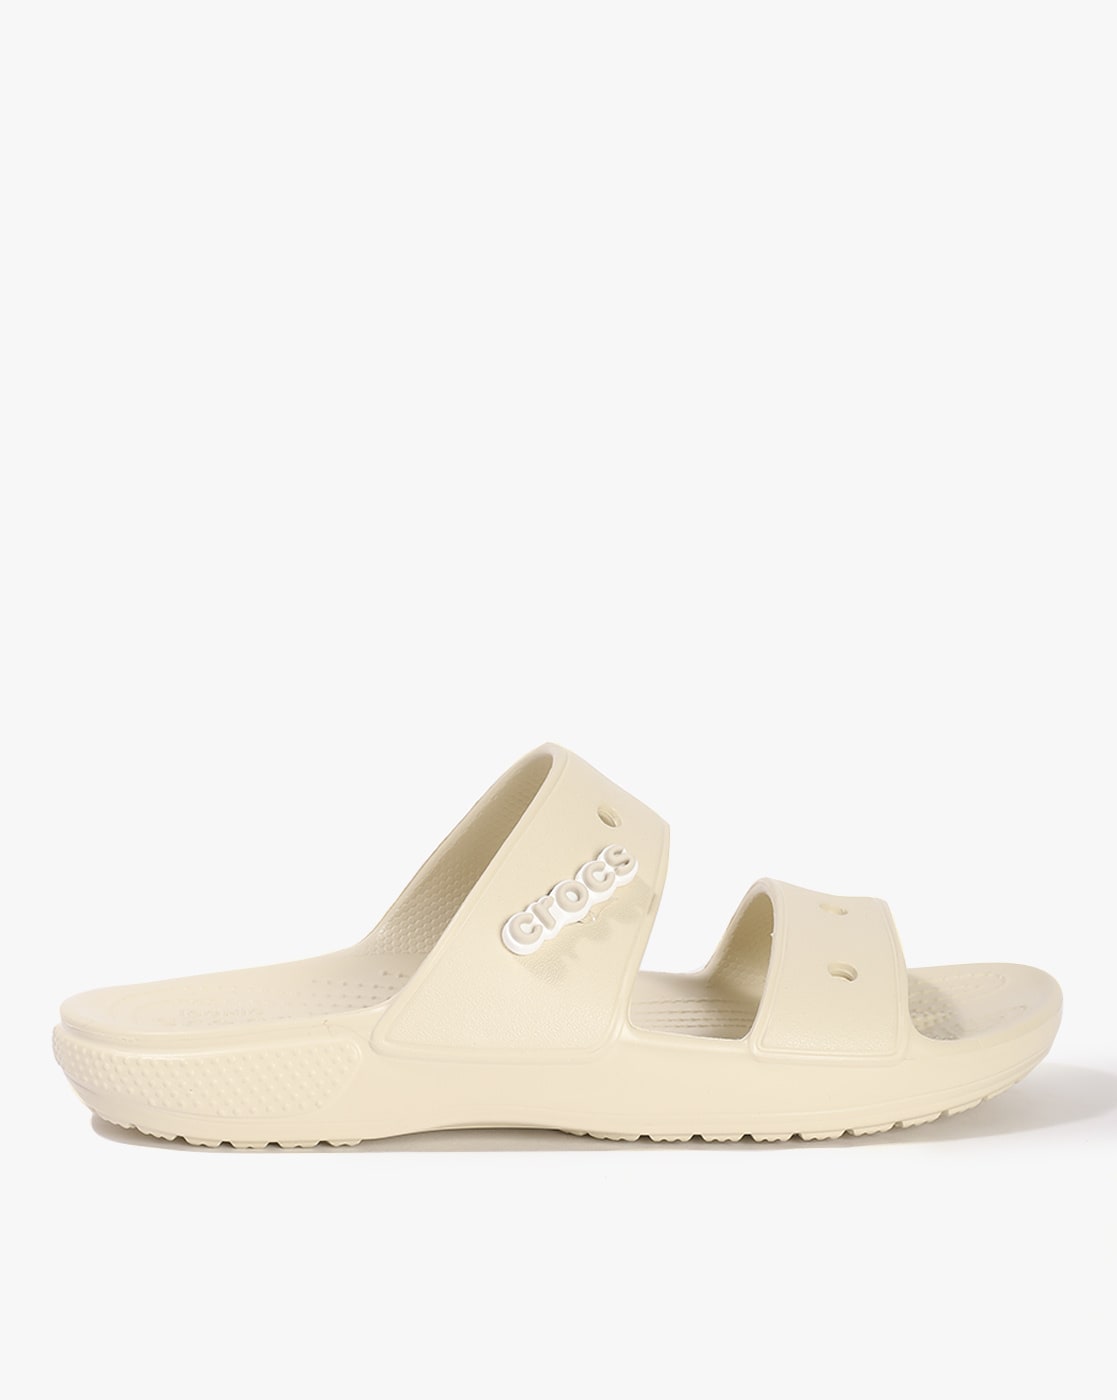 Buy Crocs Classic Sandals from Next Finland